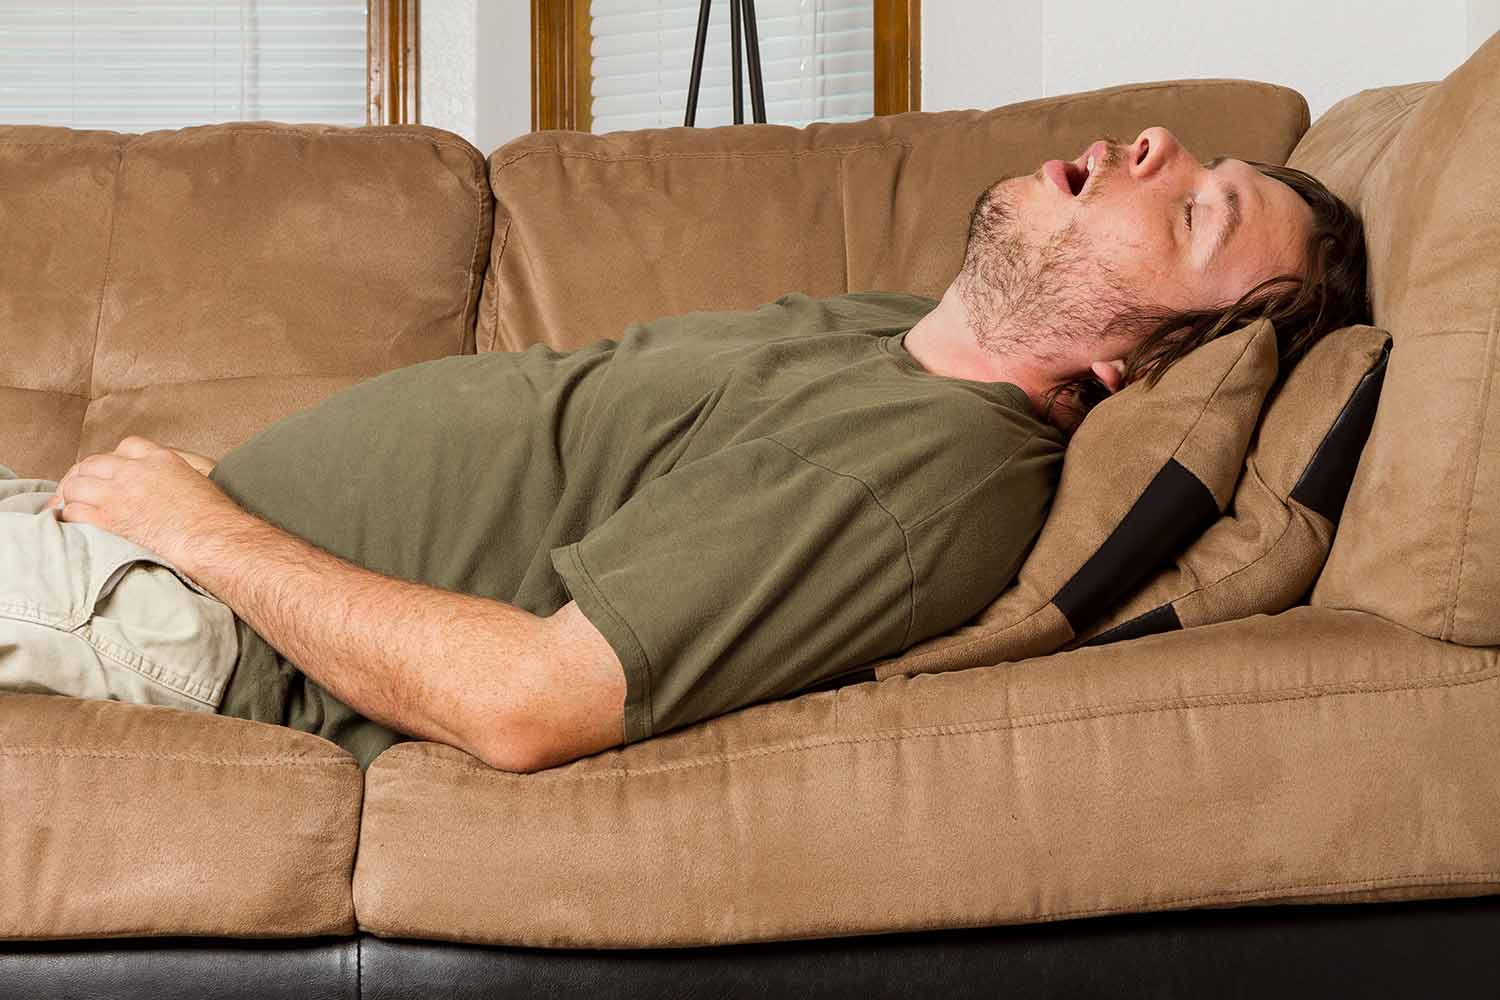 Man asleep on the couch with his mouth wide open snoring 1500 x 1000